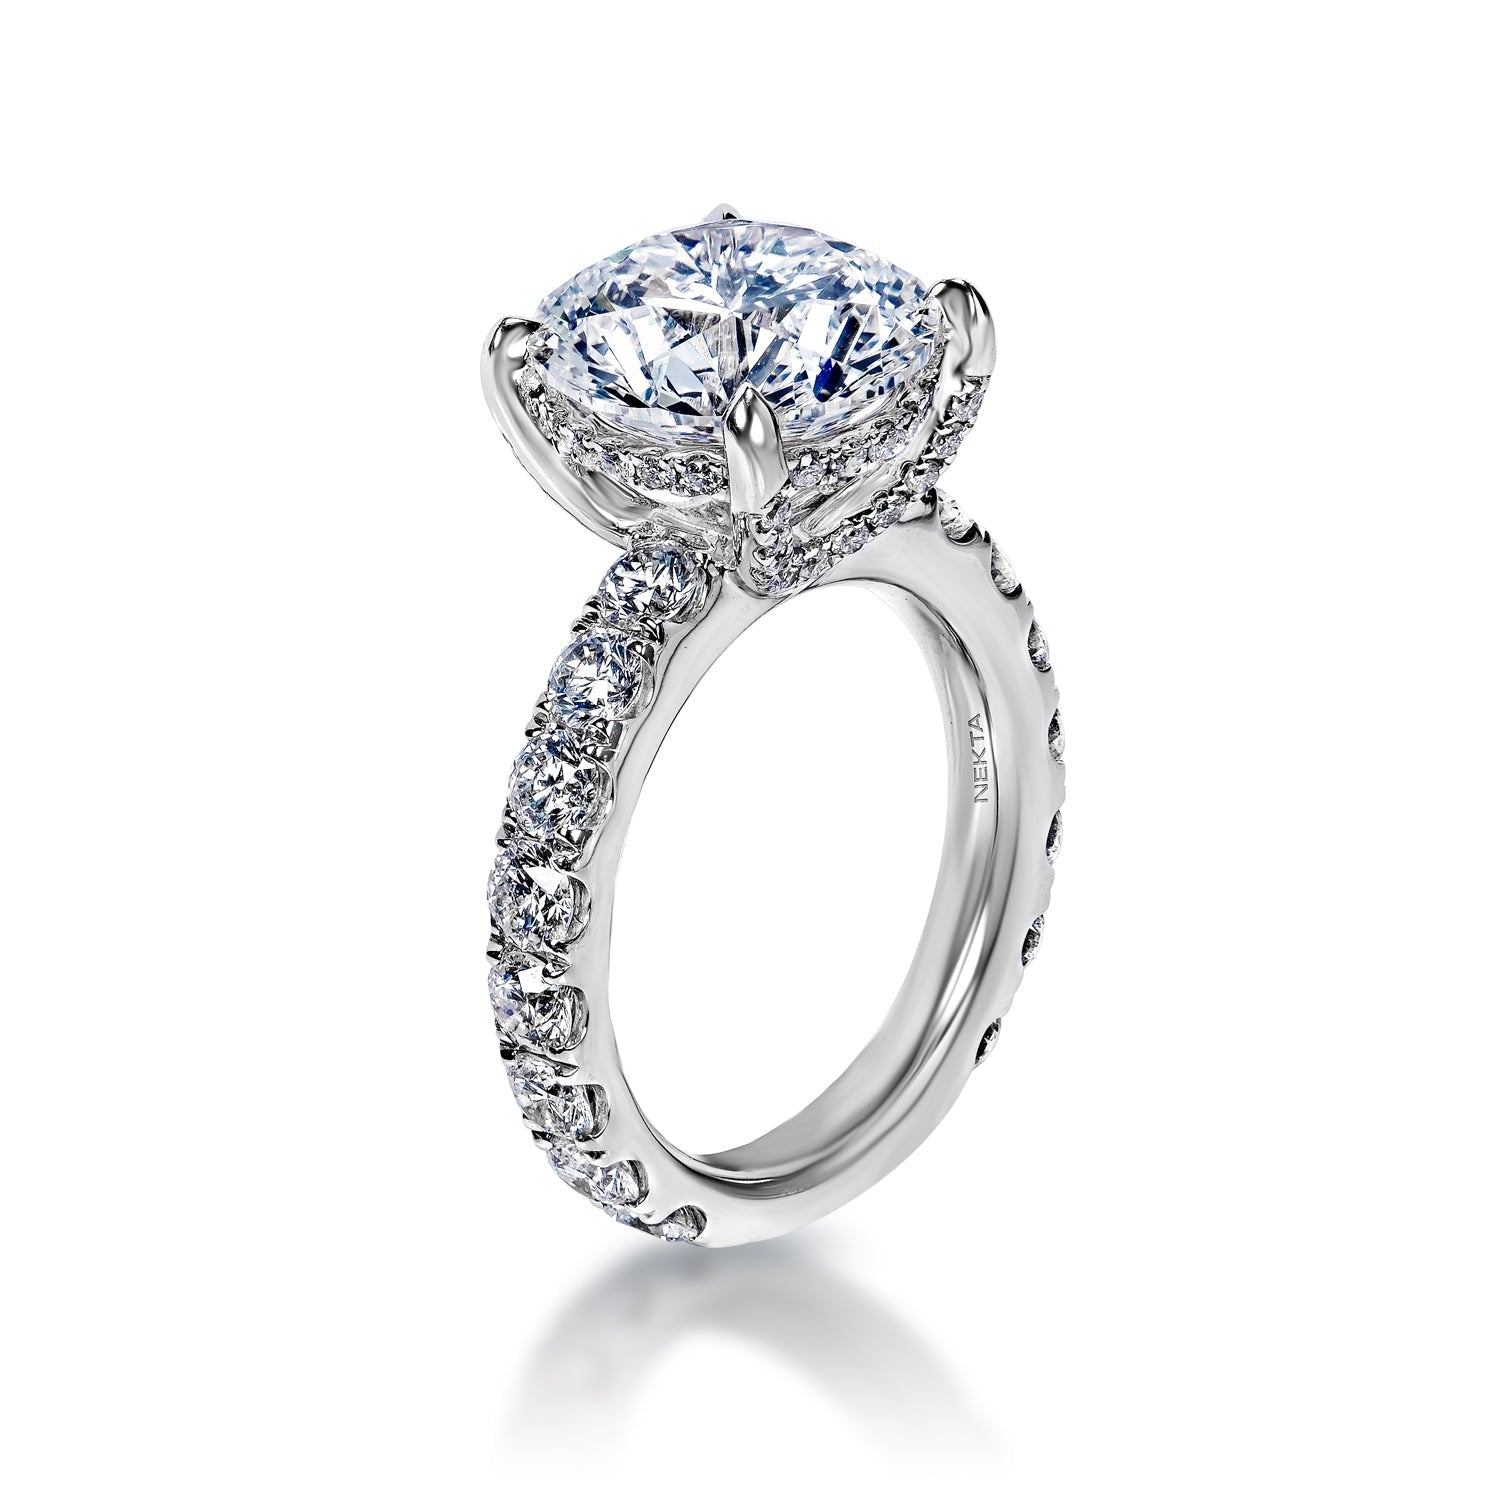 Hanna 8 Carat E SI1 Round Brilliant Diamond Engagement Ring in 18k White Gold Side View